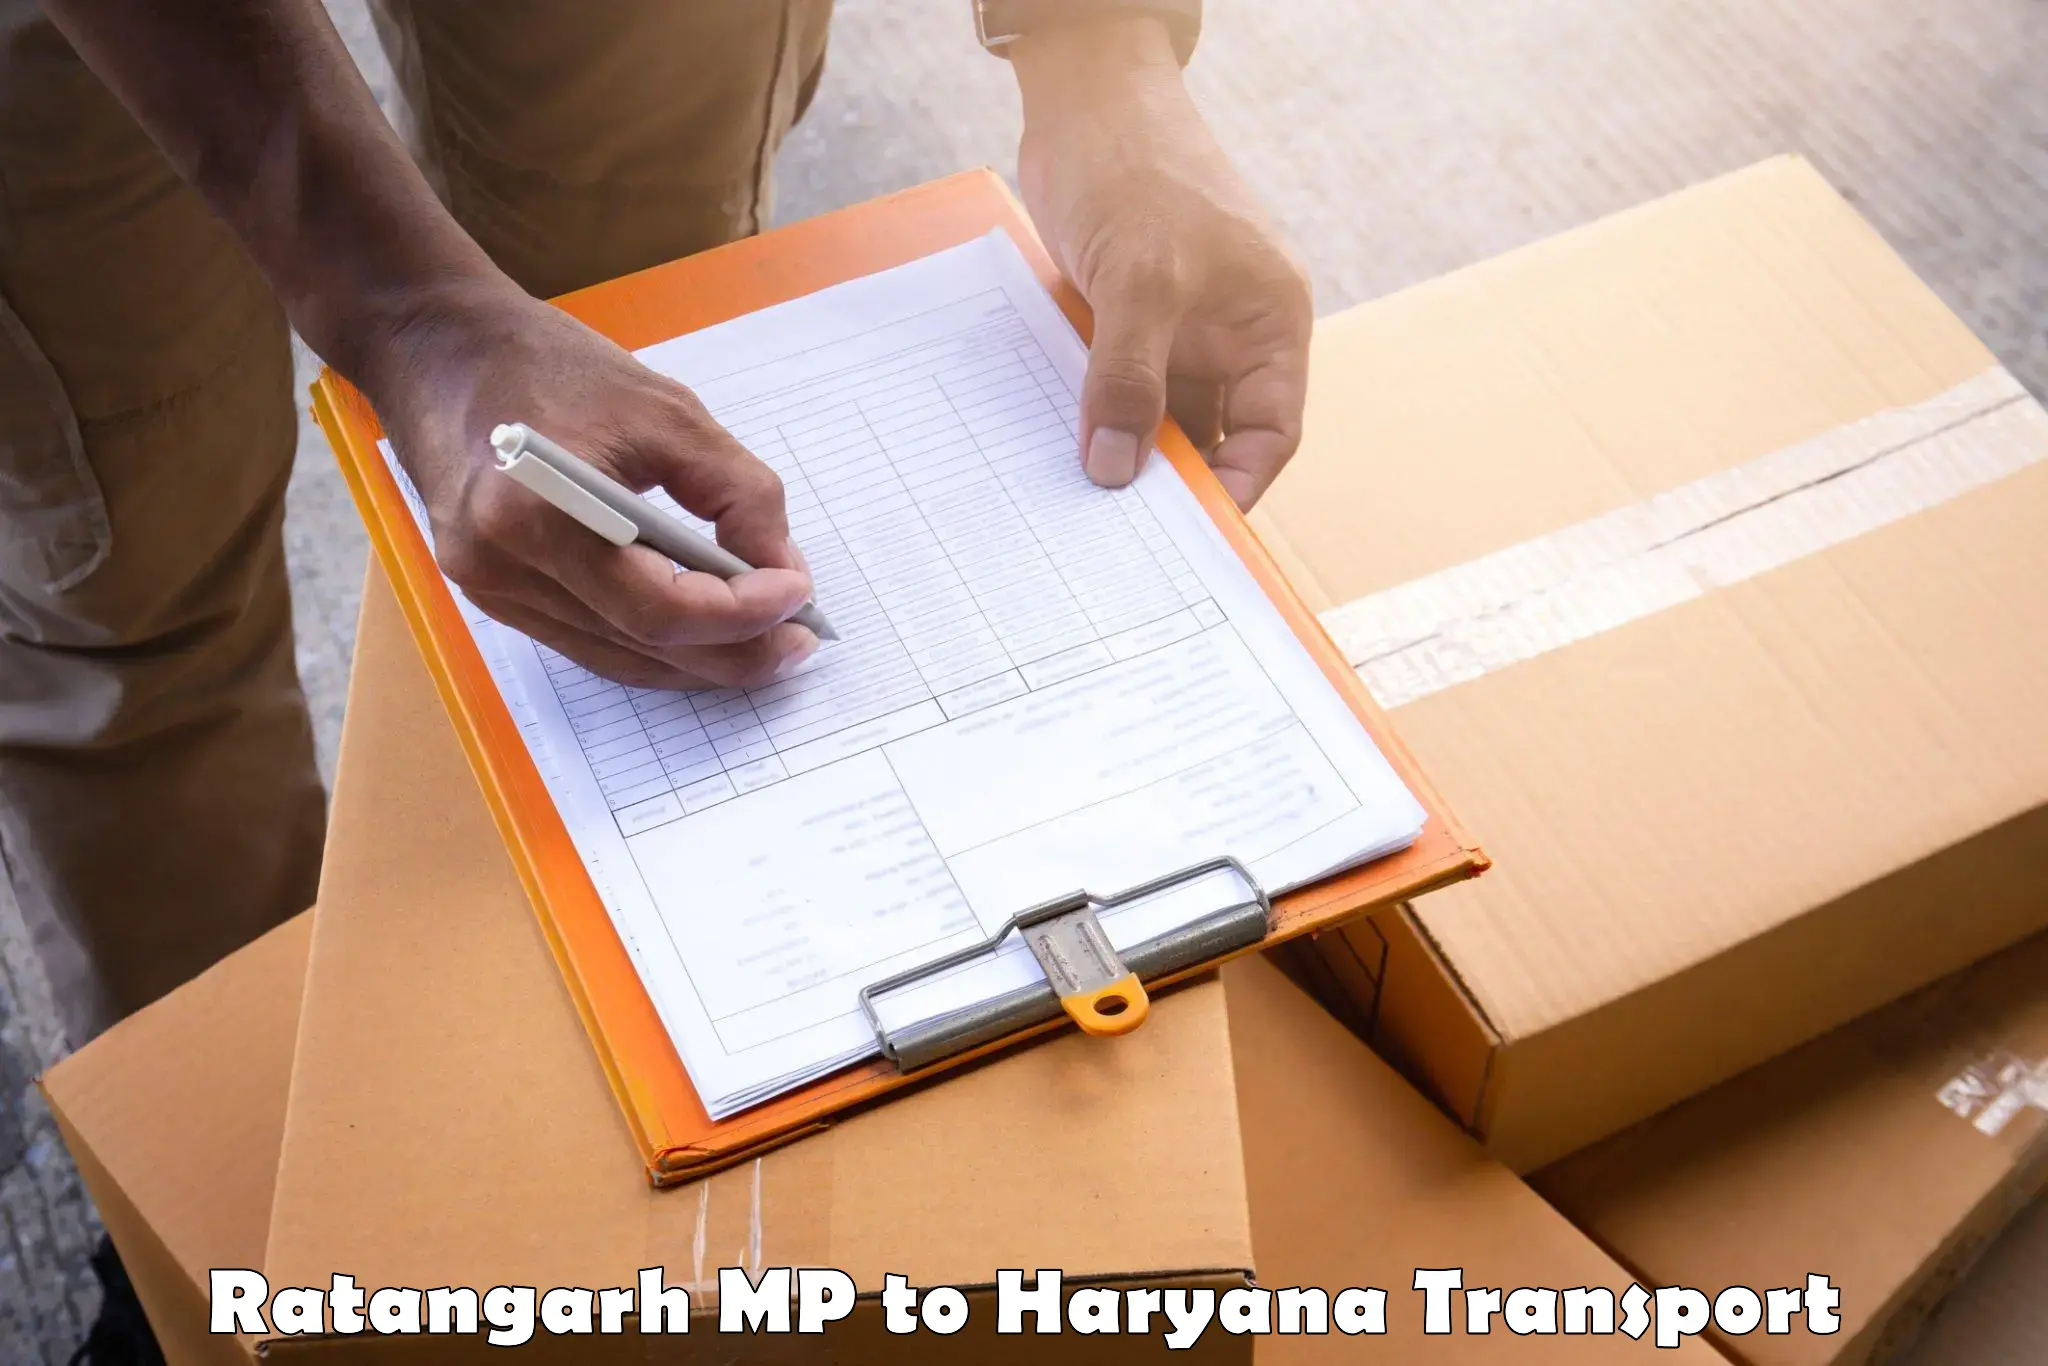 Delivery service Ratangarh MP to Narnaul